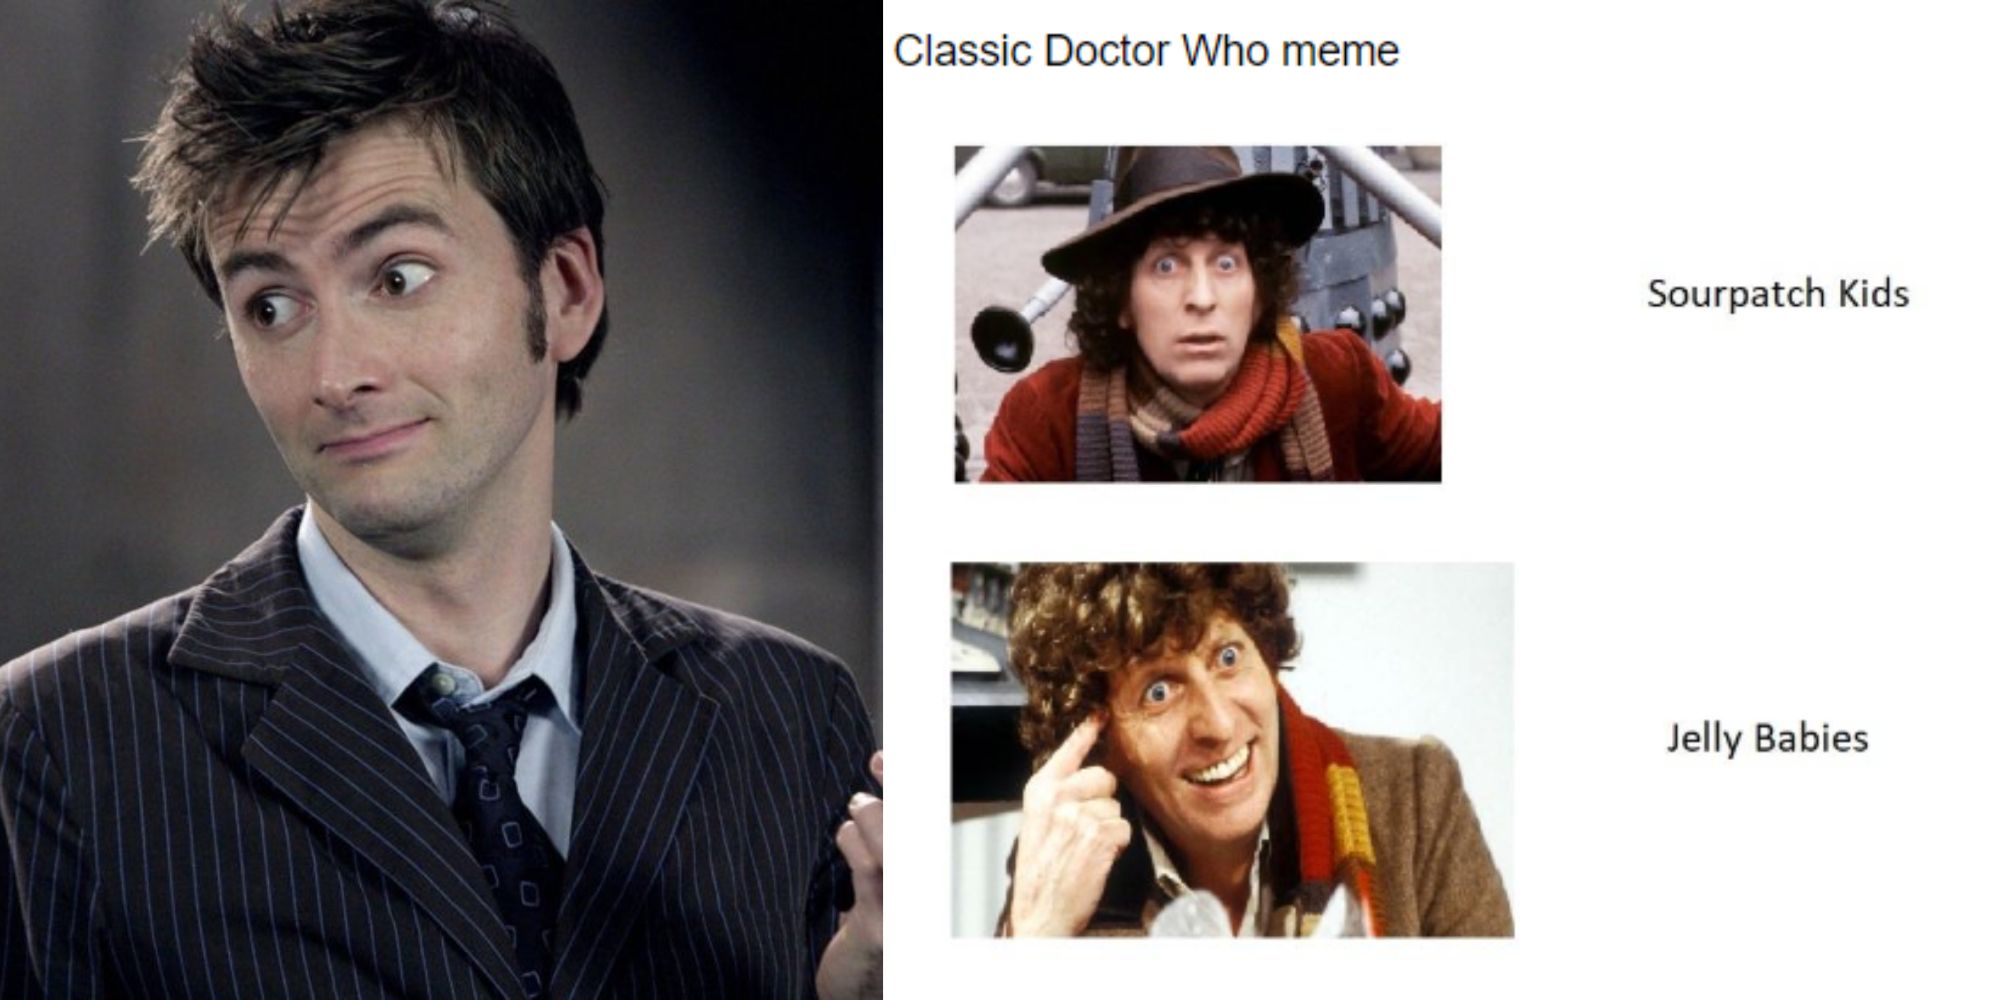 Split images of the Tenth Doctor smiling and a Fourth Doctor meme